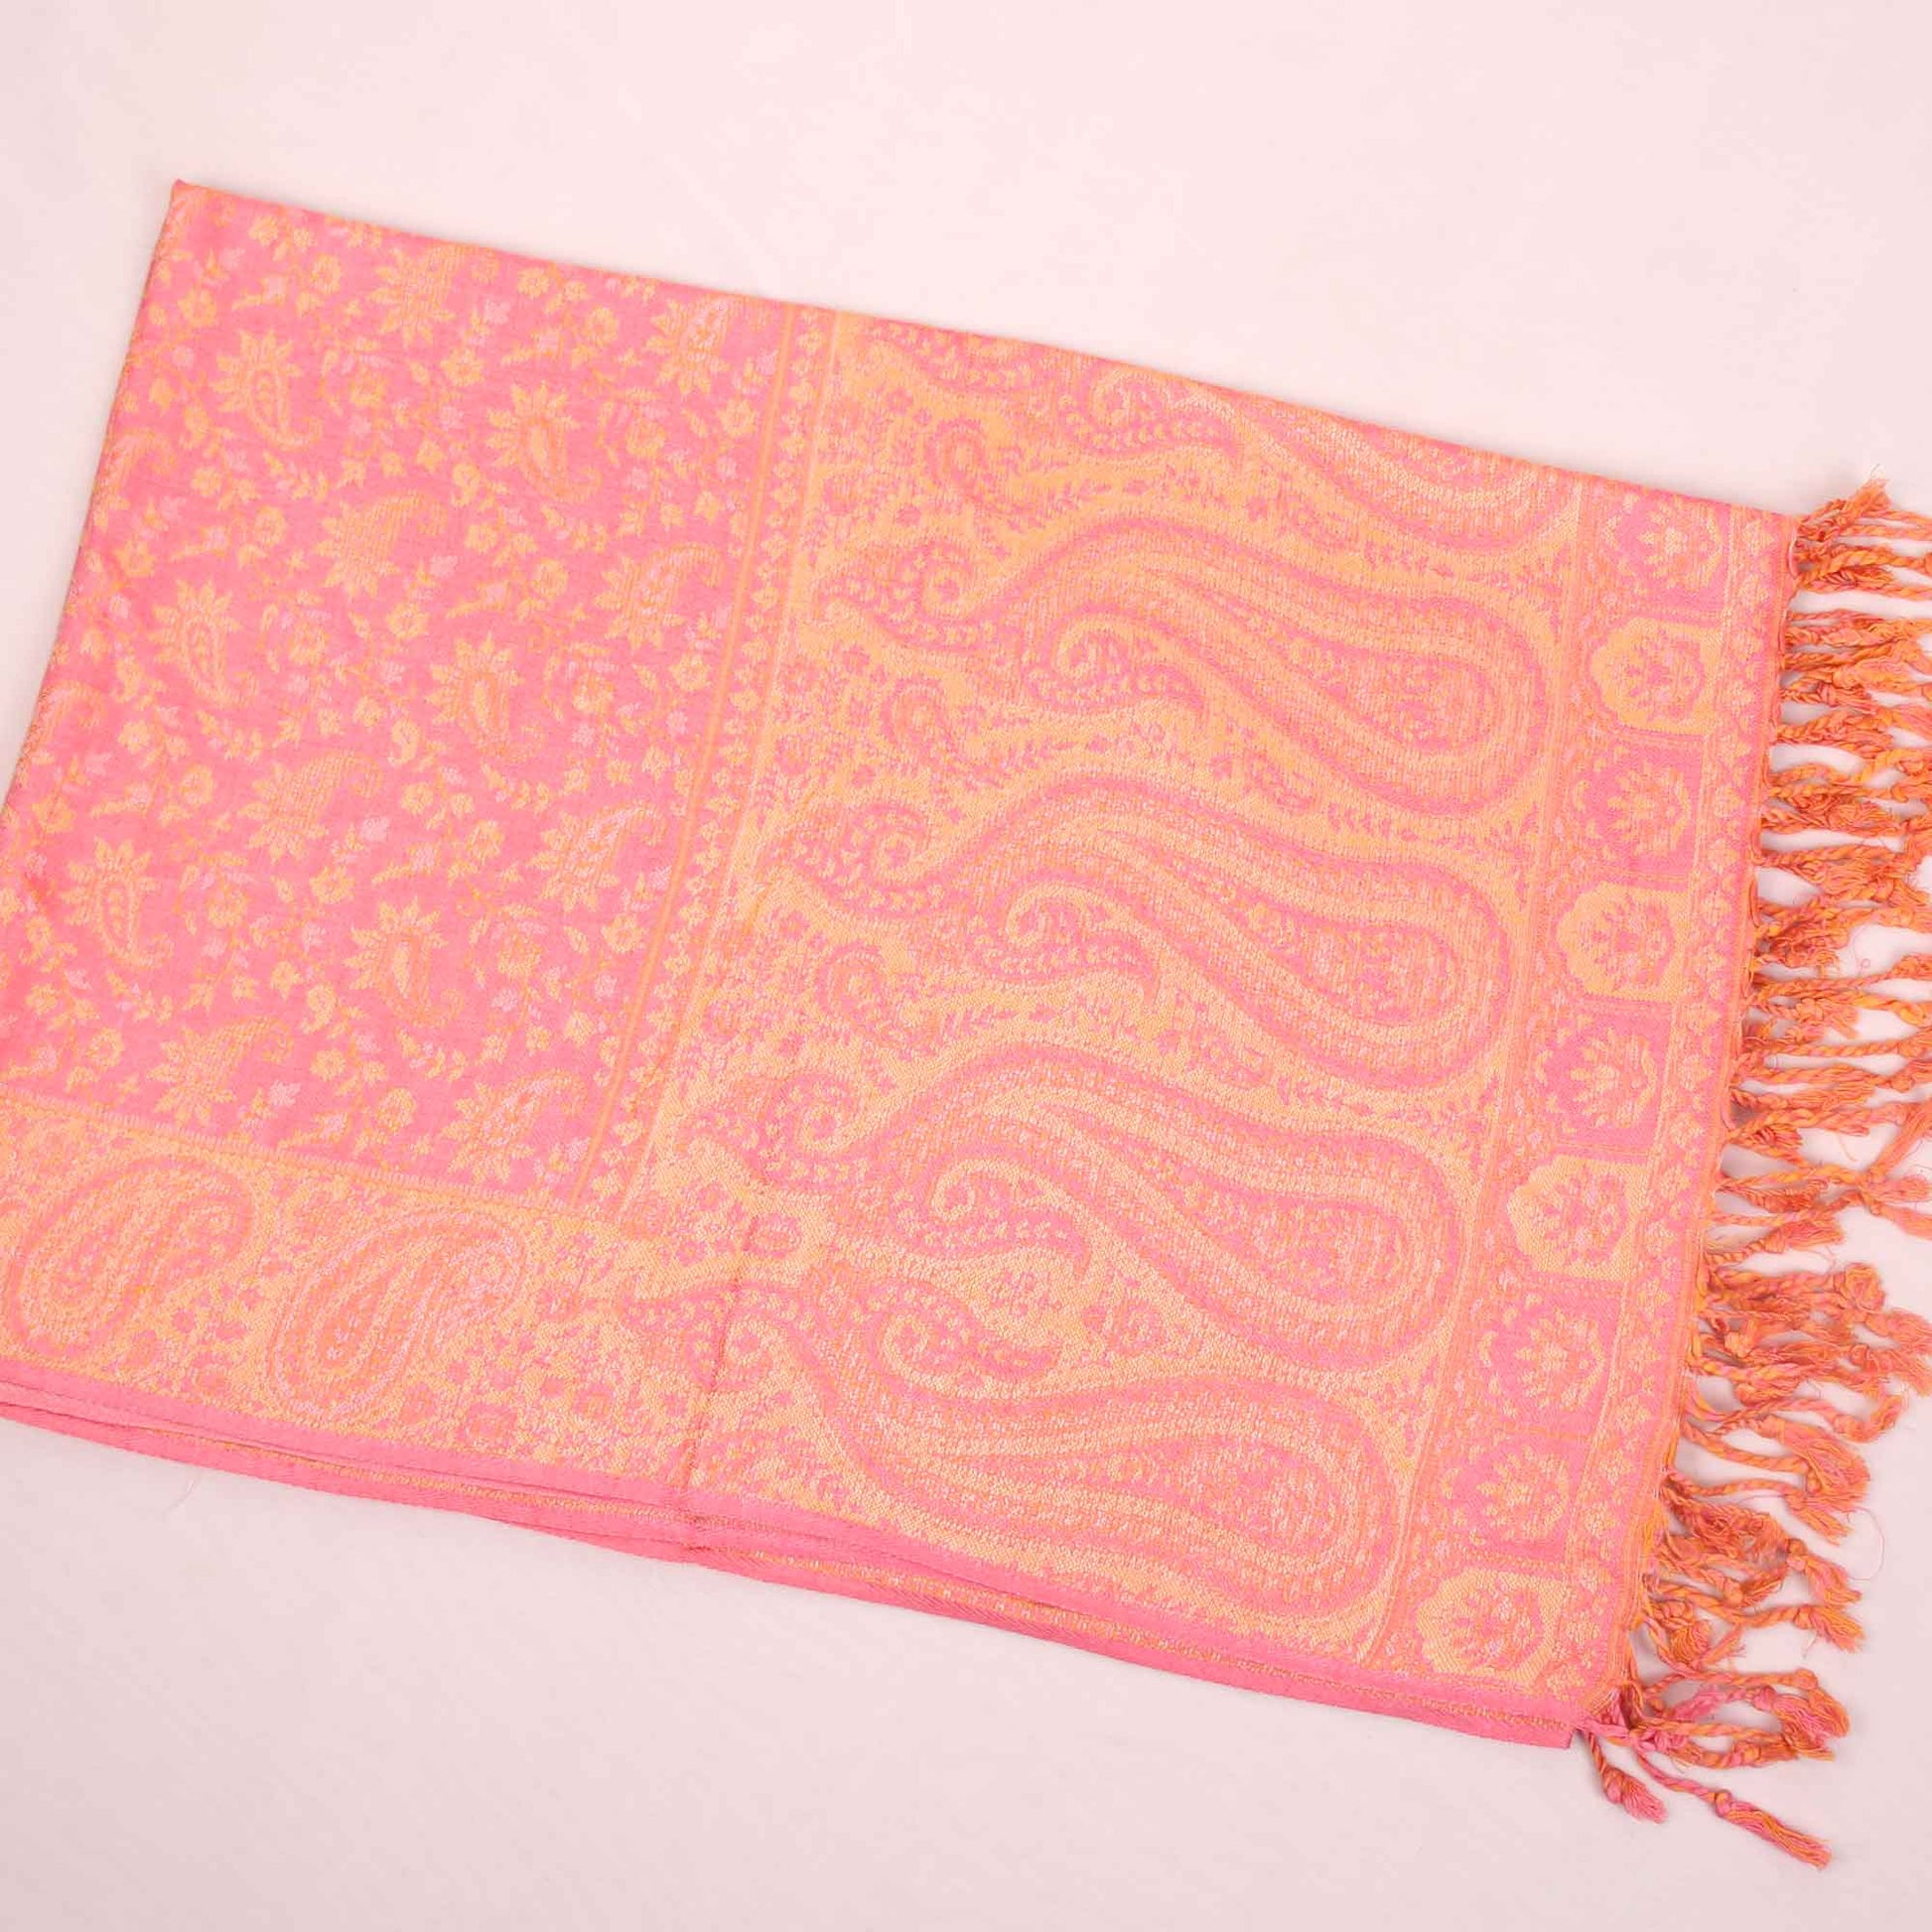 Stole,The Sultani Art Reversible Stole in Pink - Cippele Multi Store